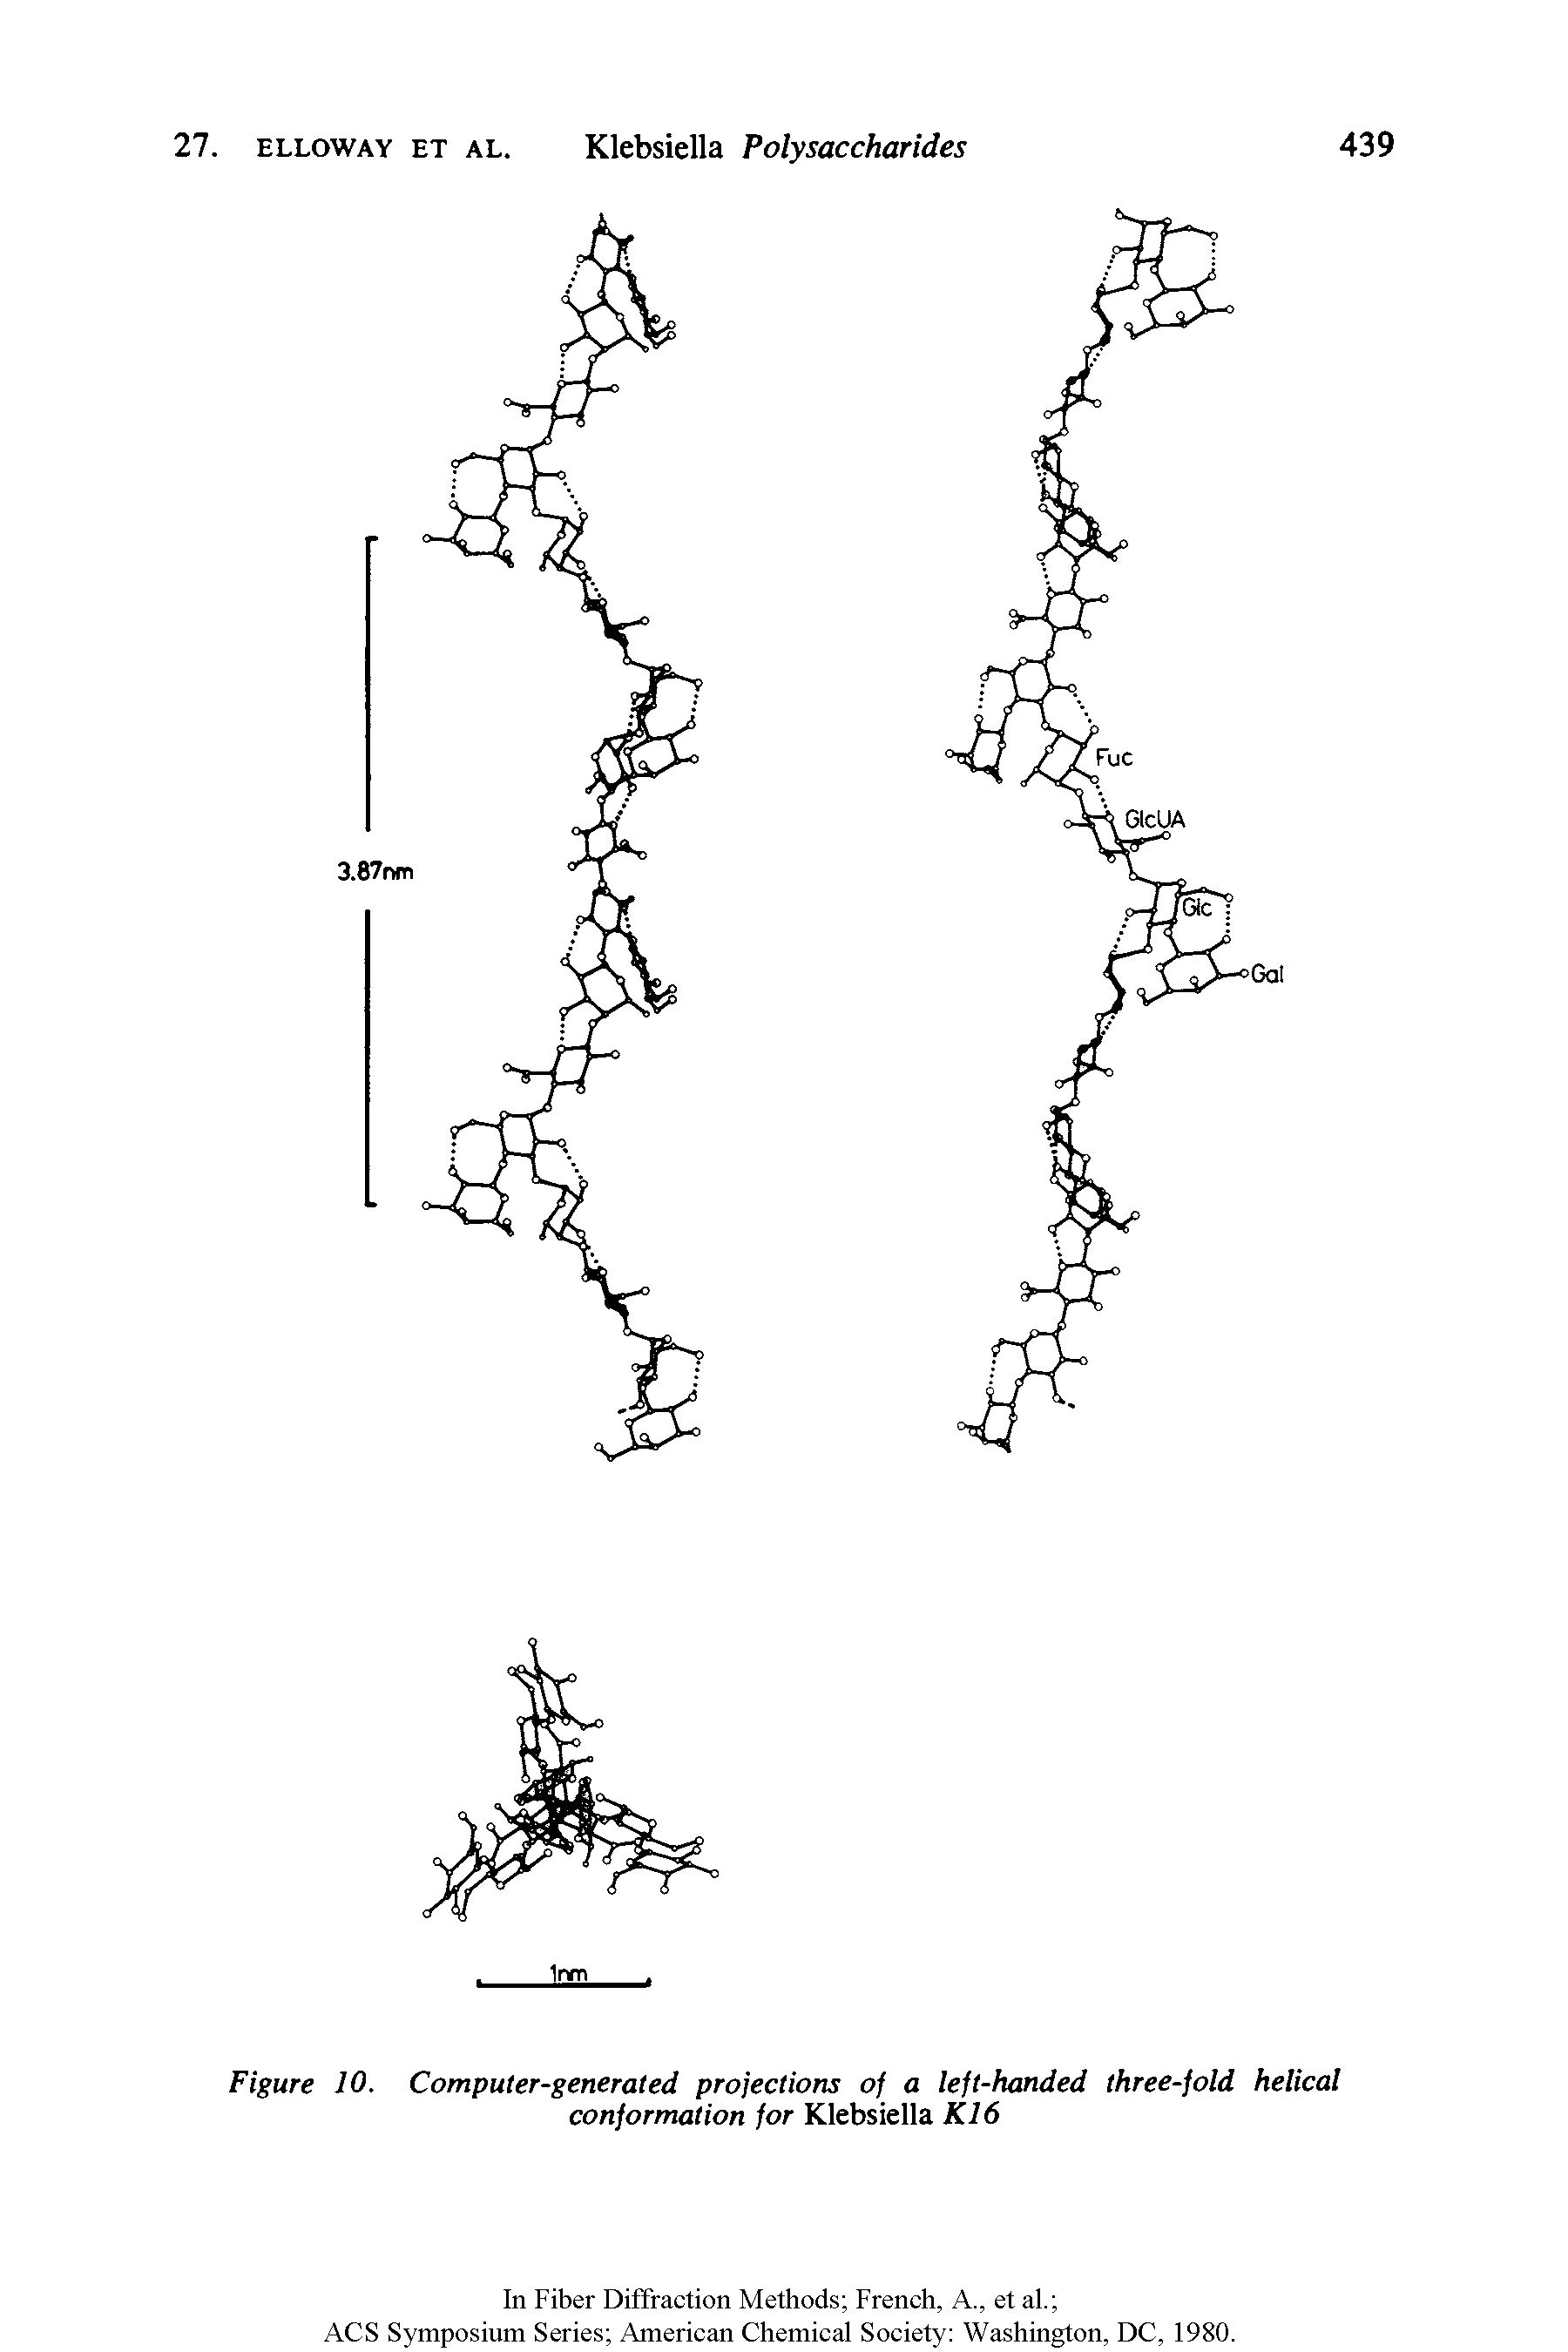 Figure 10. Computer-generated projections of a left-handed three-fold helical conformation for Klebsiella K16...